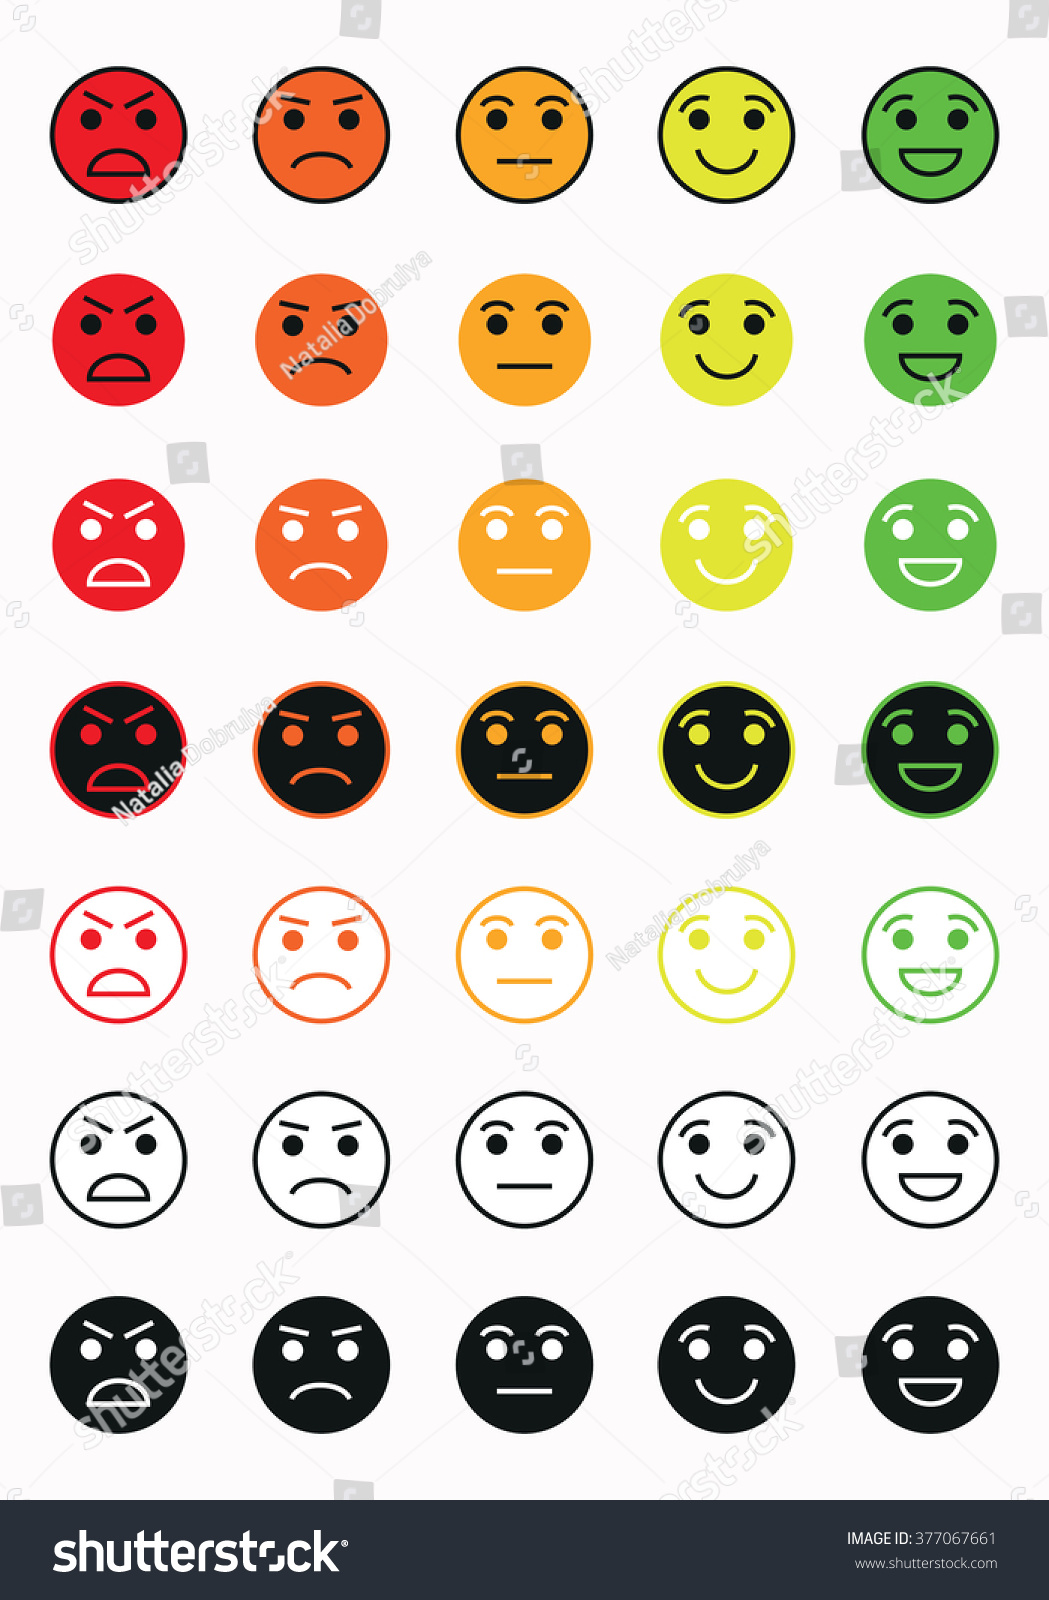 Vector Illustration Your Mood Level Awful Stock Vector (Royalty Free ...